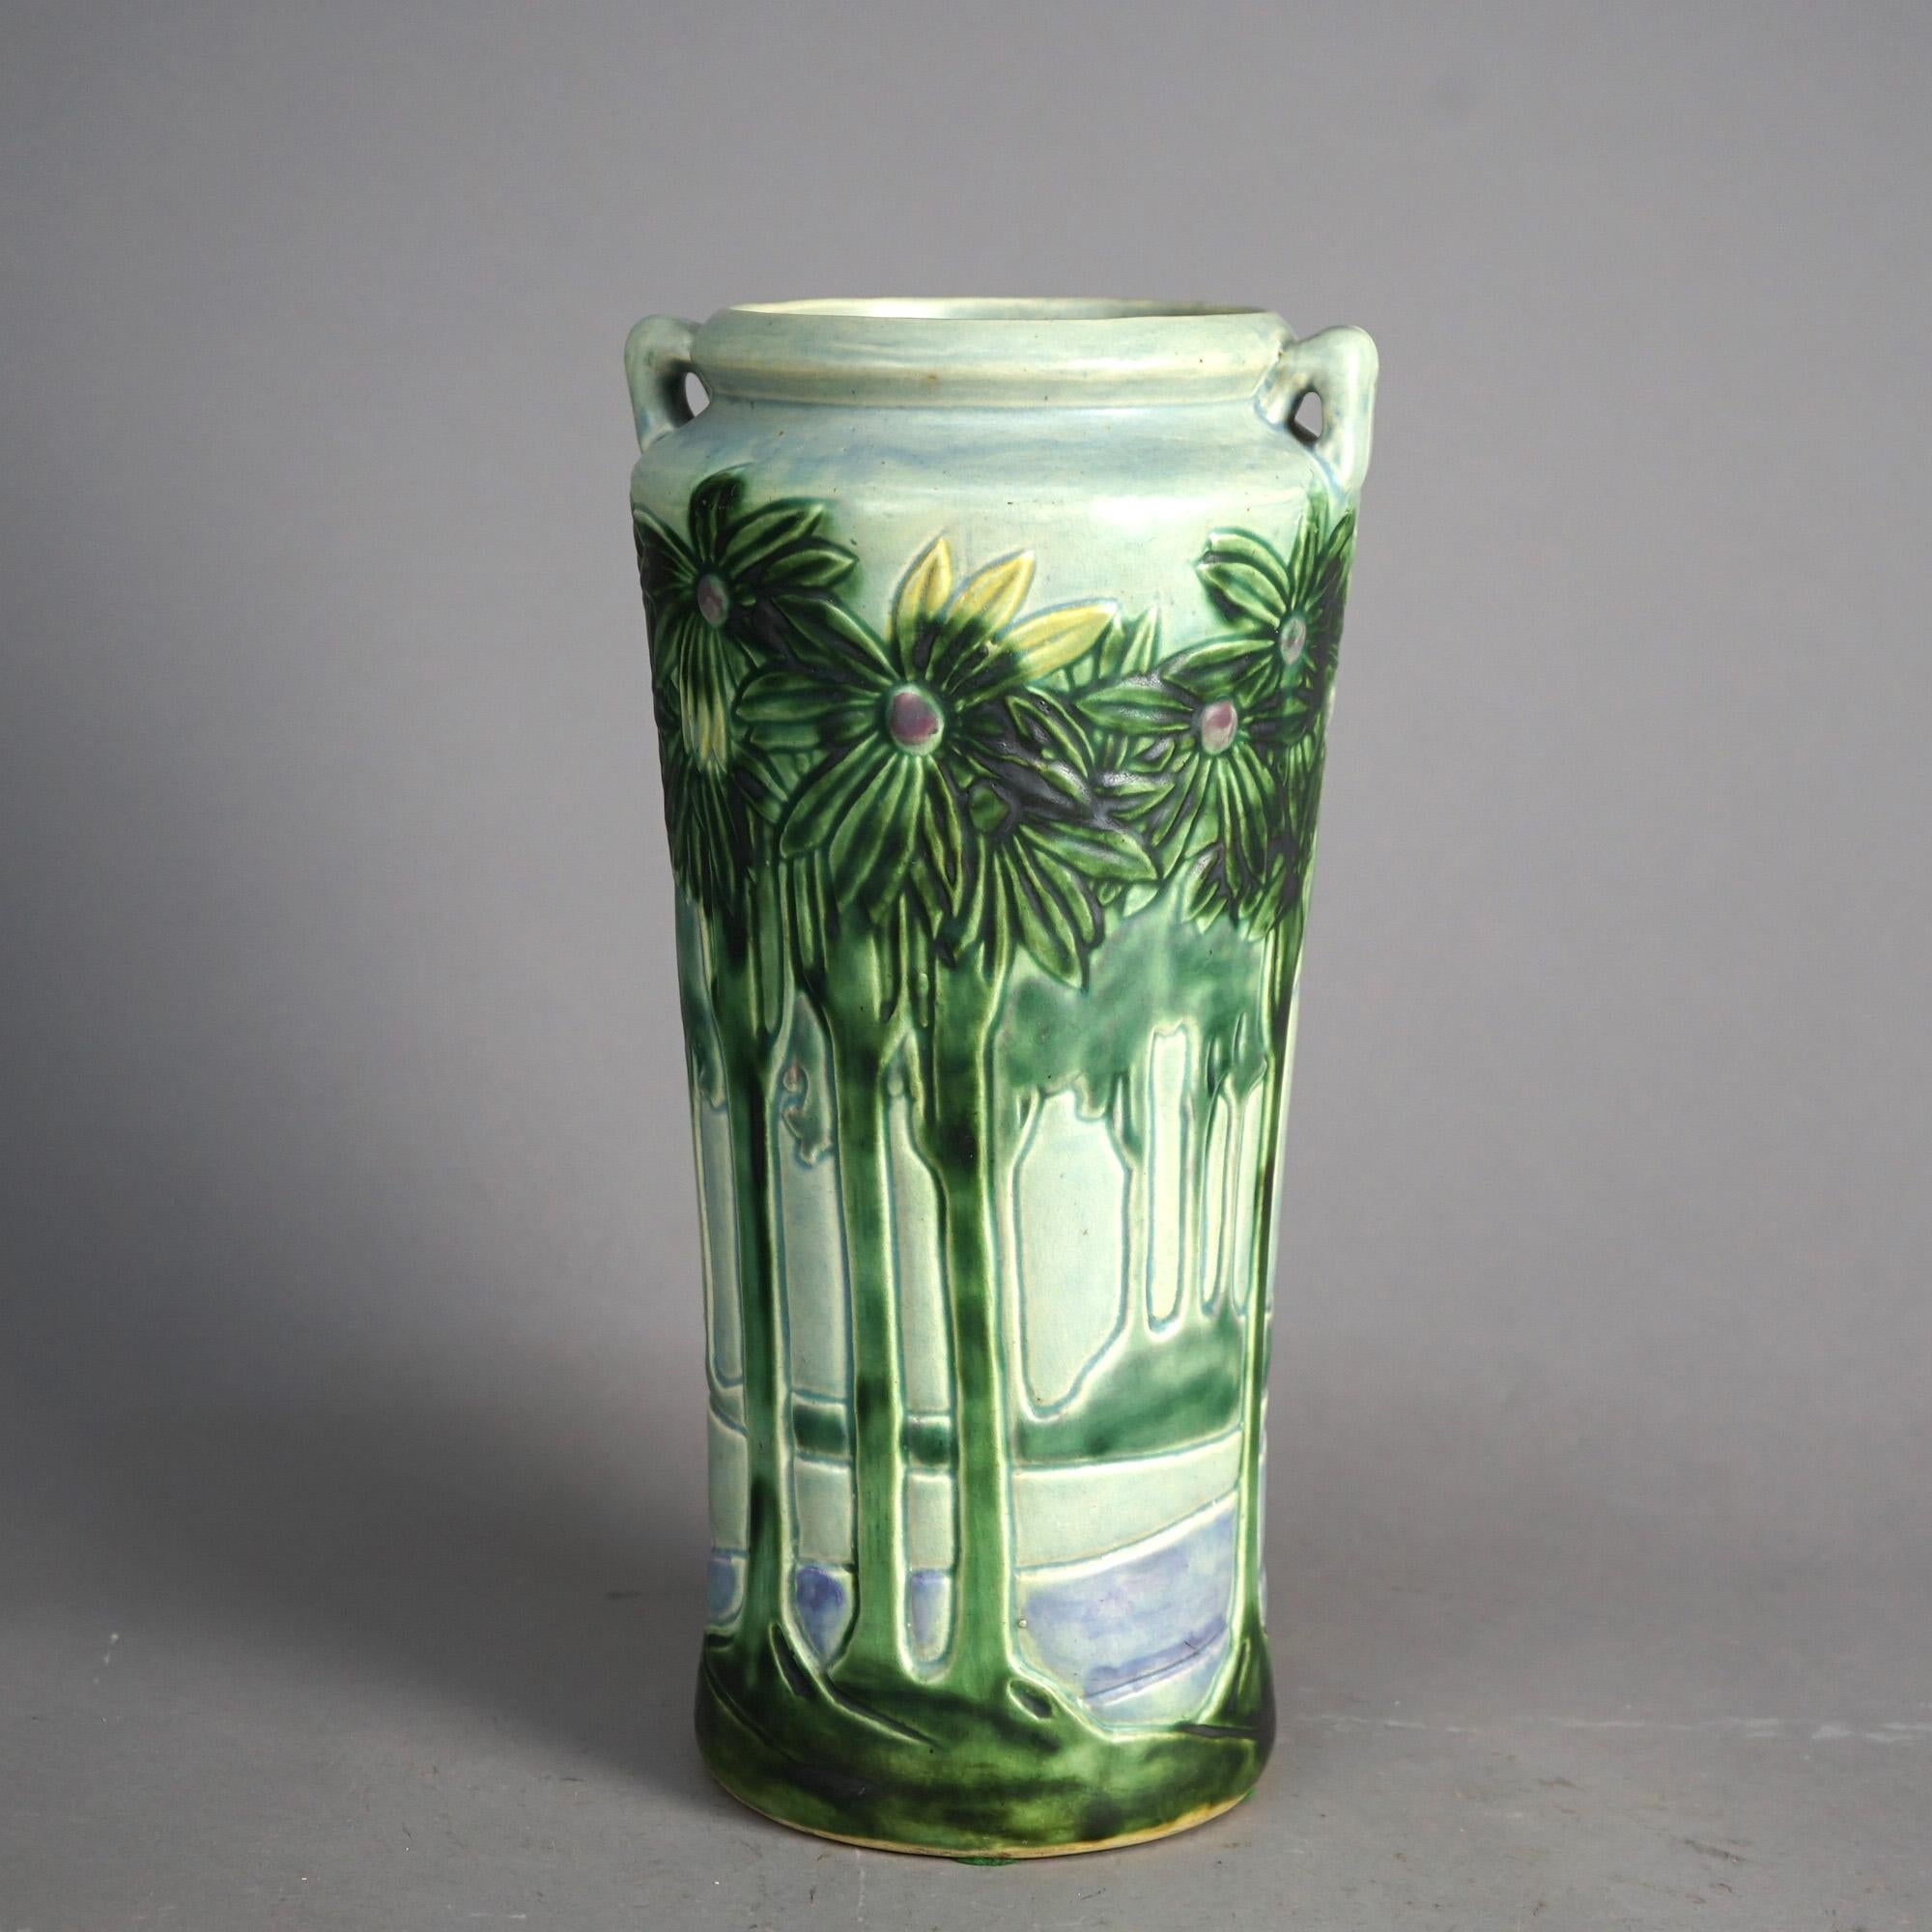 An antique and large vase by Roseville offers art pottery construction in cylindrical form with double handles and having Vista design with trees and water, c1920

Measures - 15